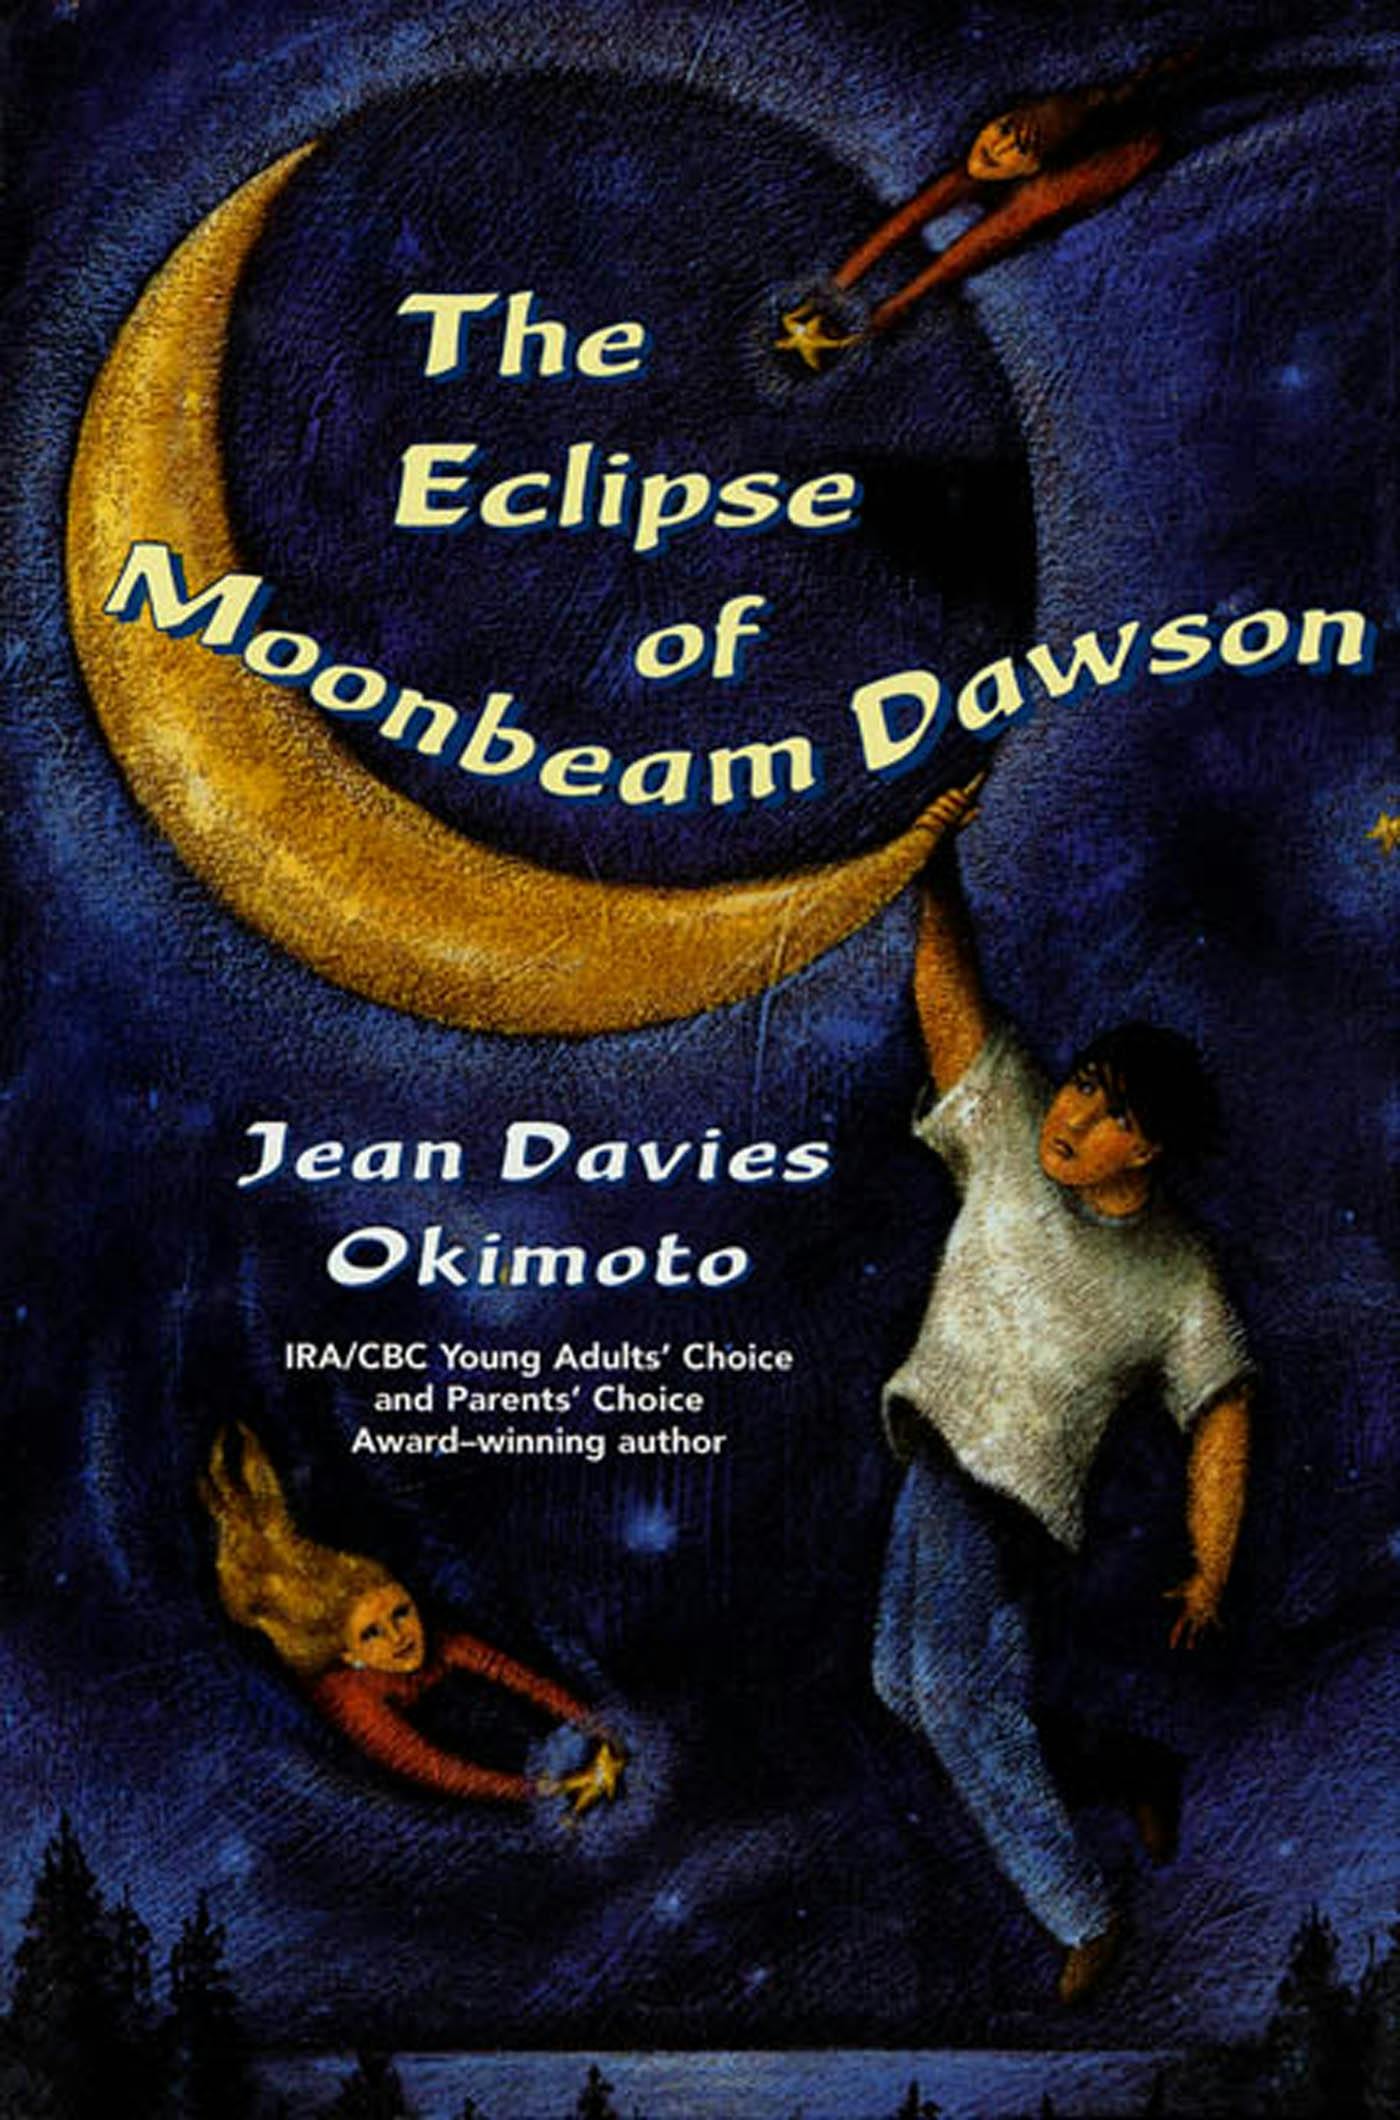 Cover for the book titled as: The Eclipse of Moonbeam Dawson